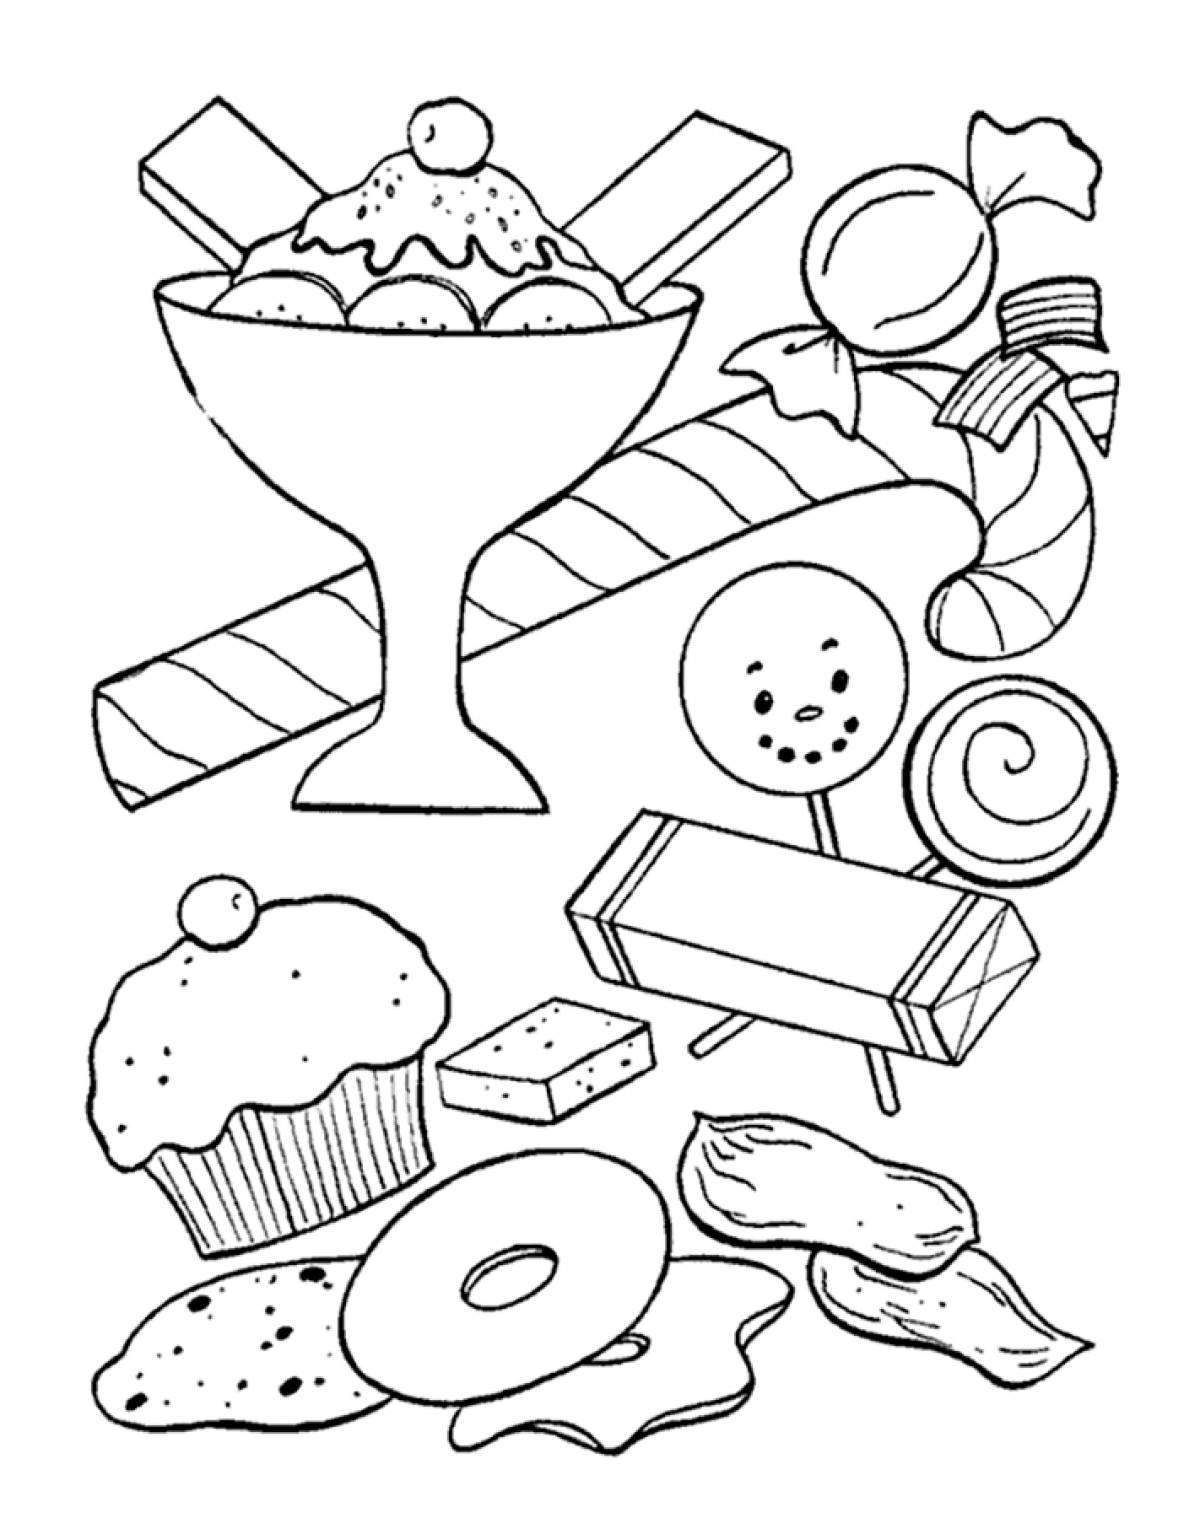 Sweets coloring page